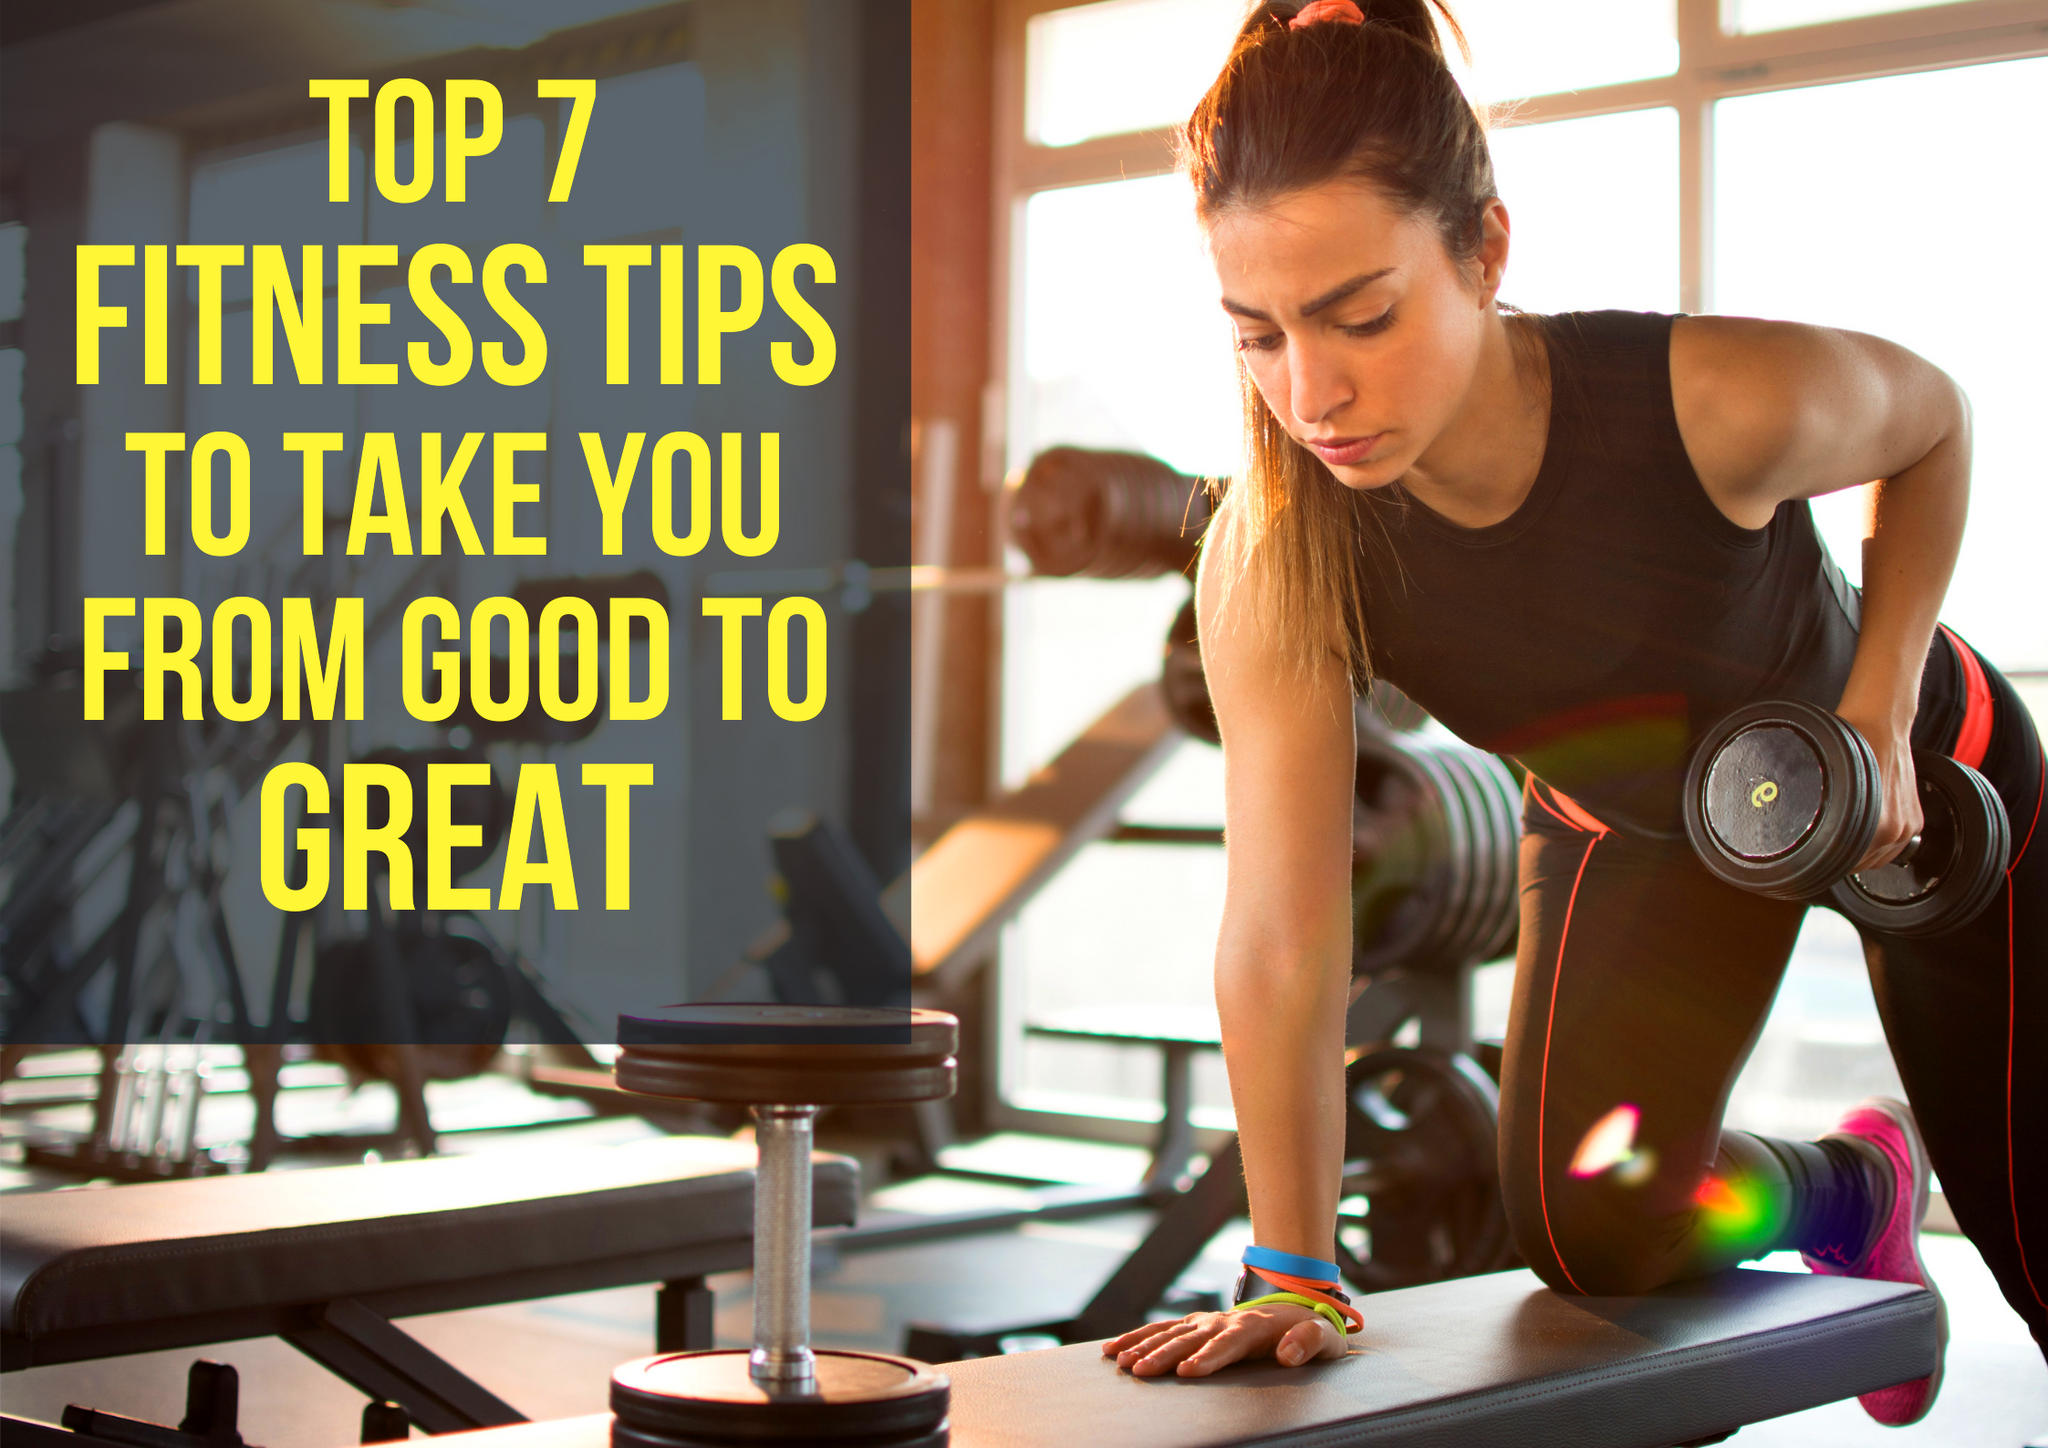 Top 7 Fitness Tips to Take You from Good to Great